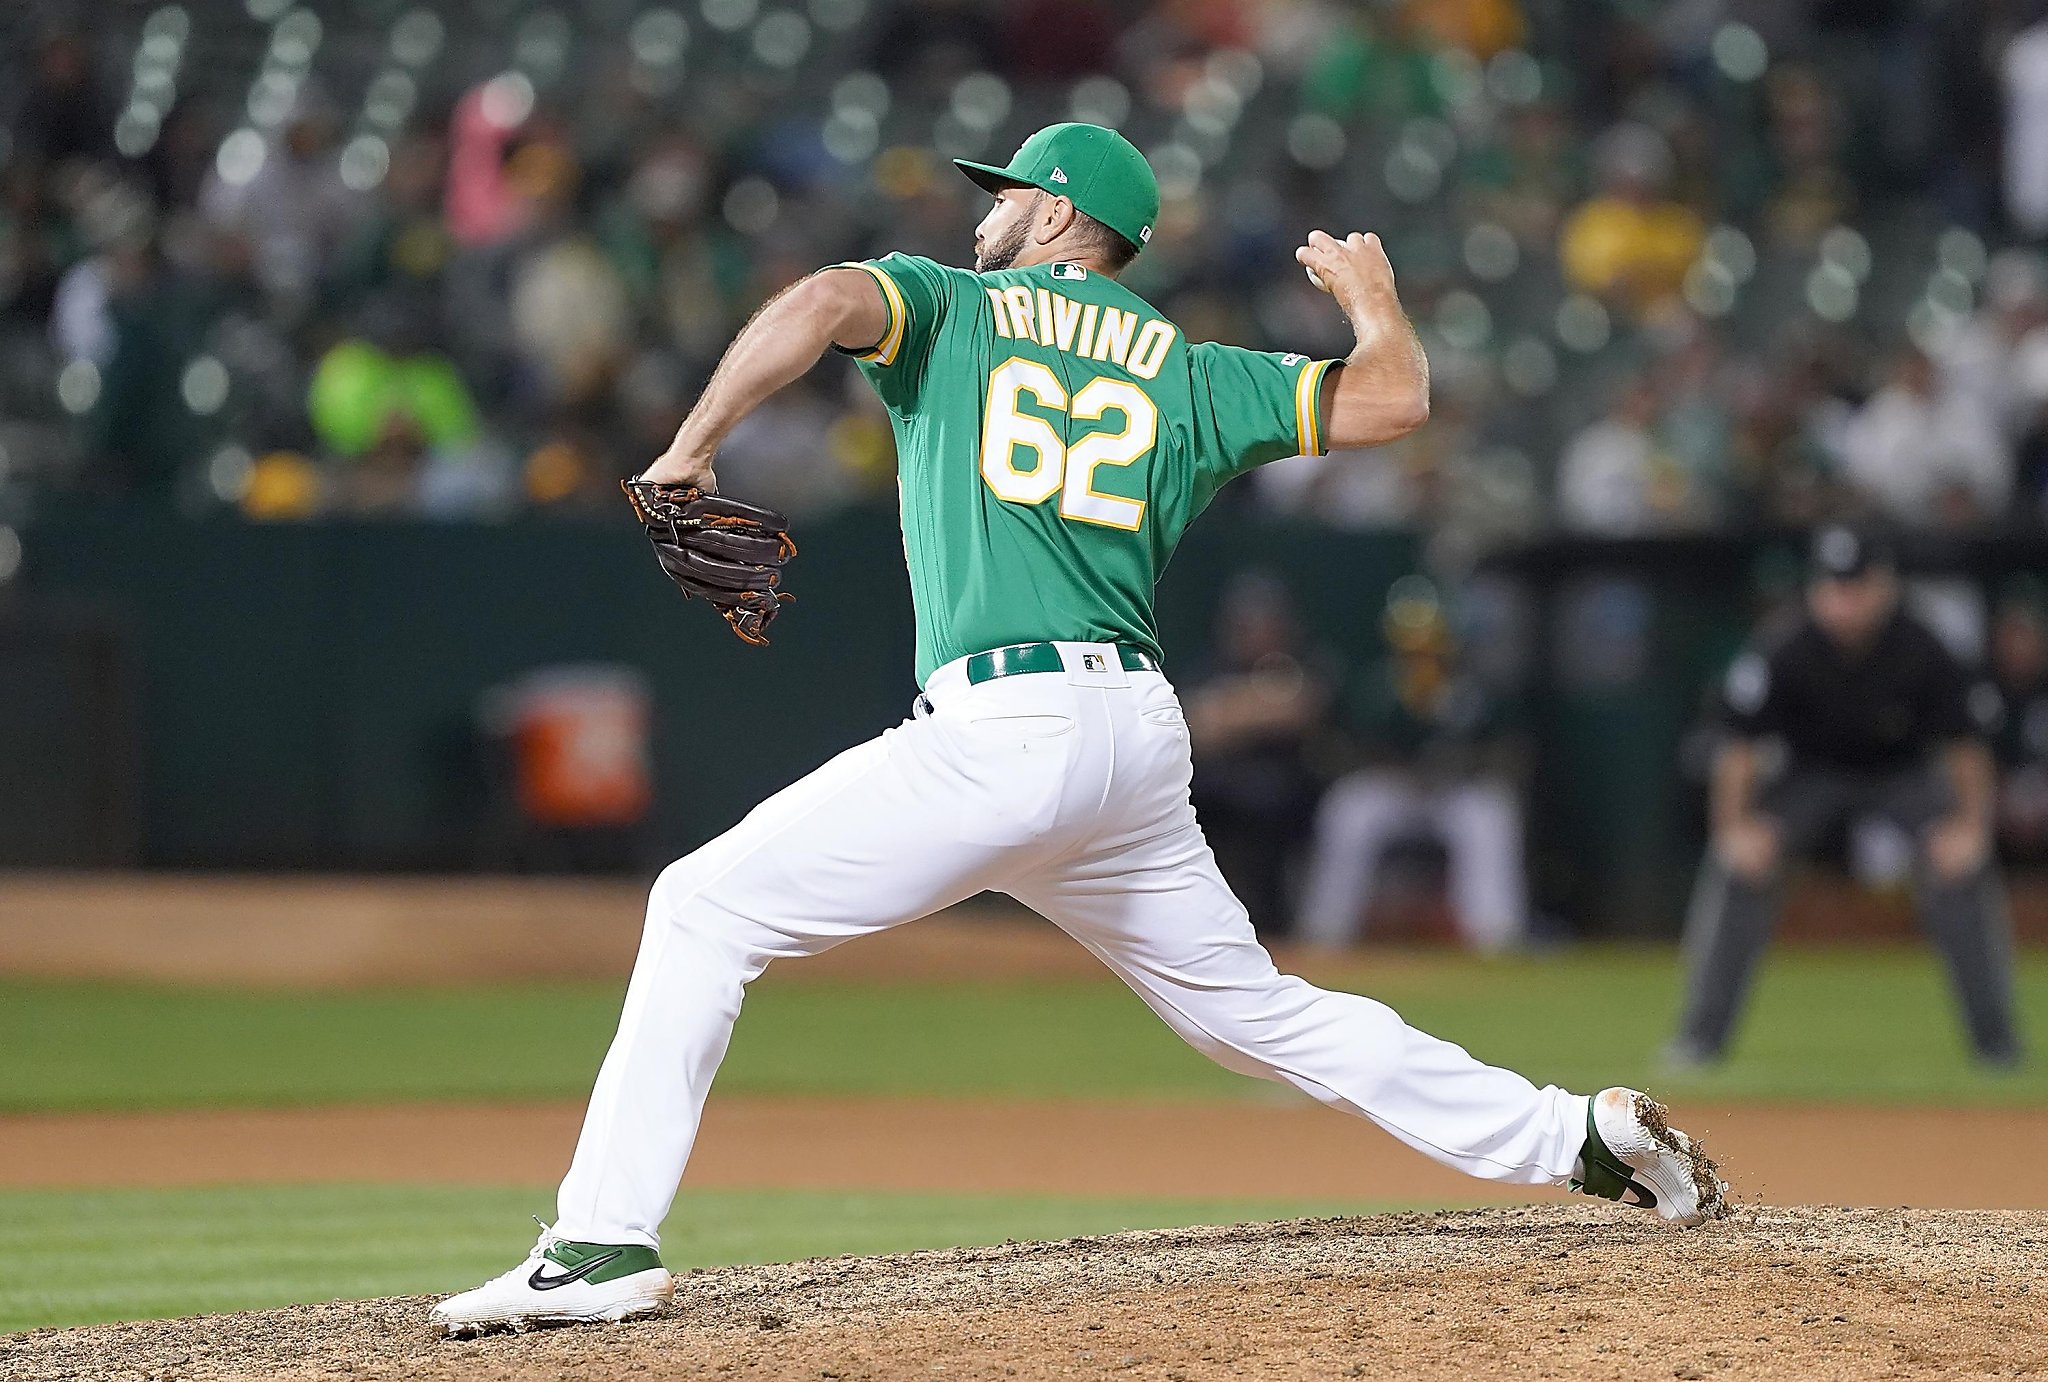 After rough season, Lou Trivino turns in best work in A's win Friday